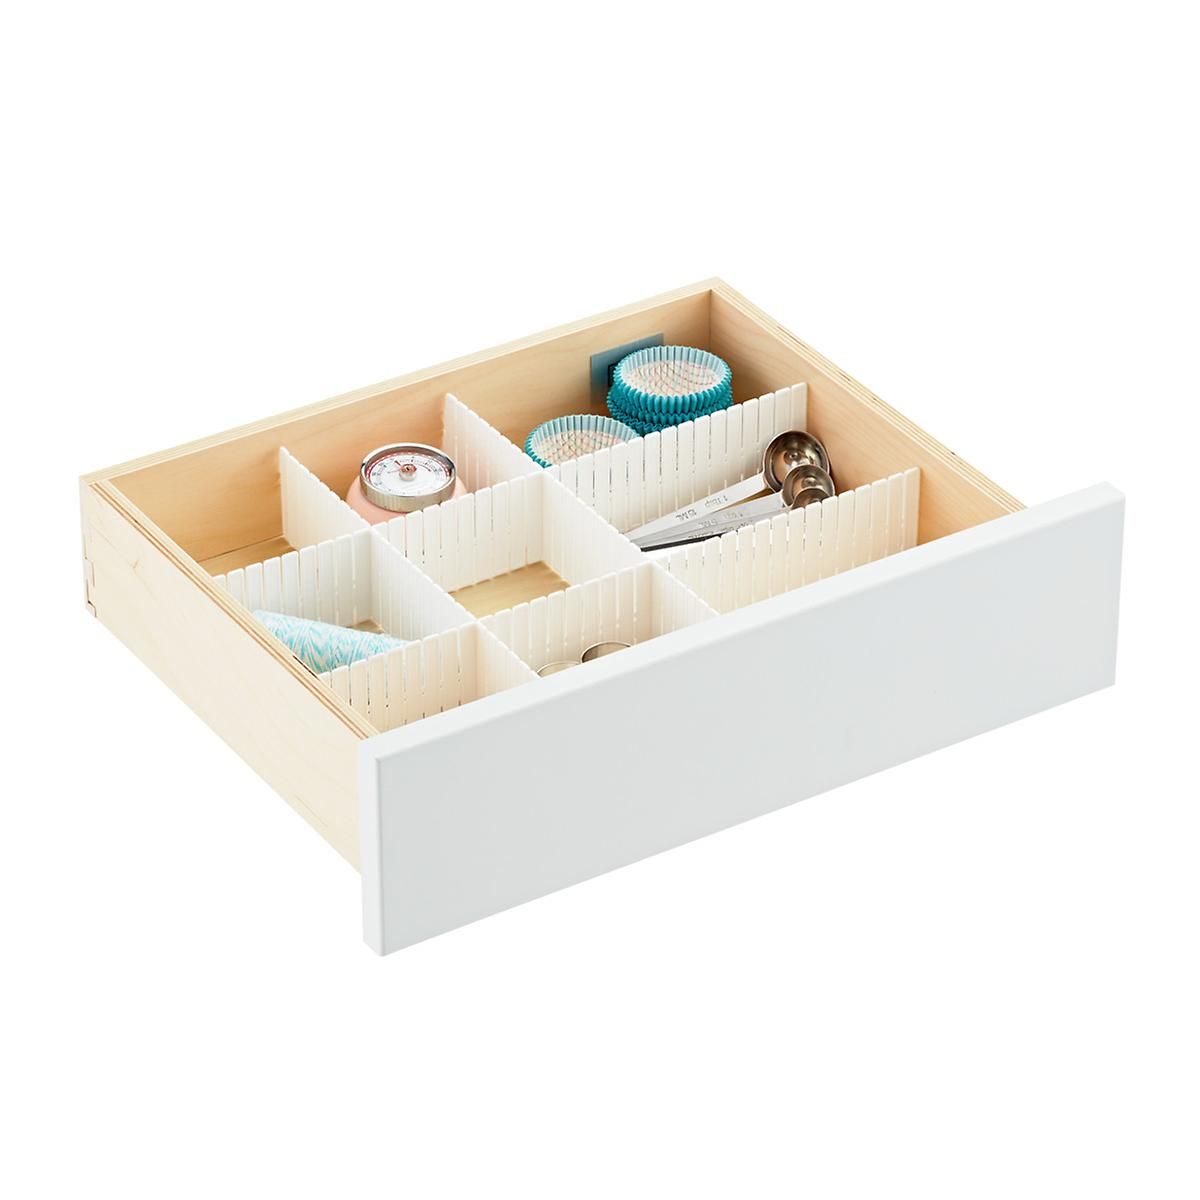 Slotted Interlocking Drawer Organizers | The Container Store